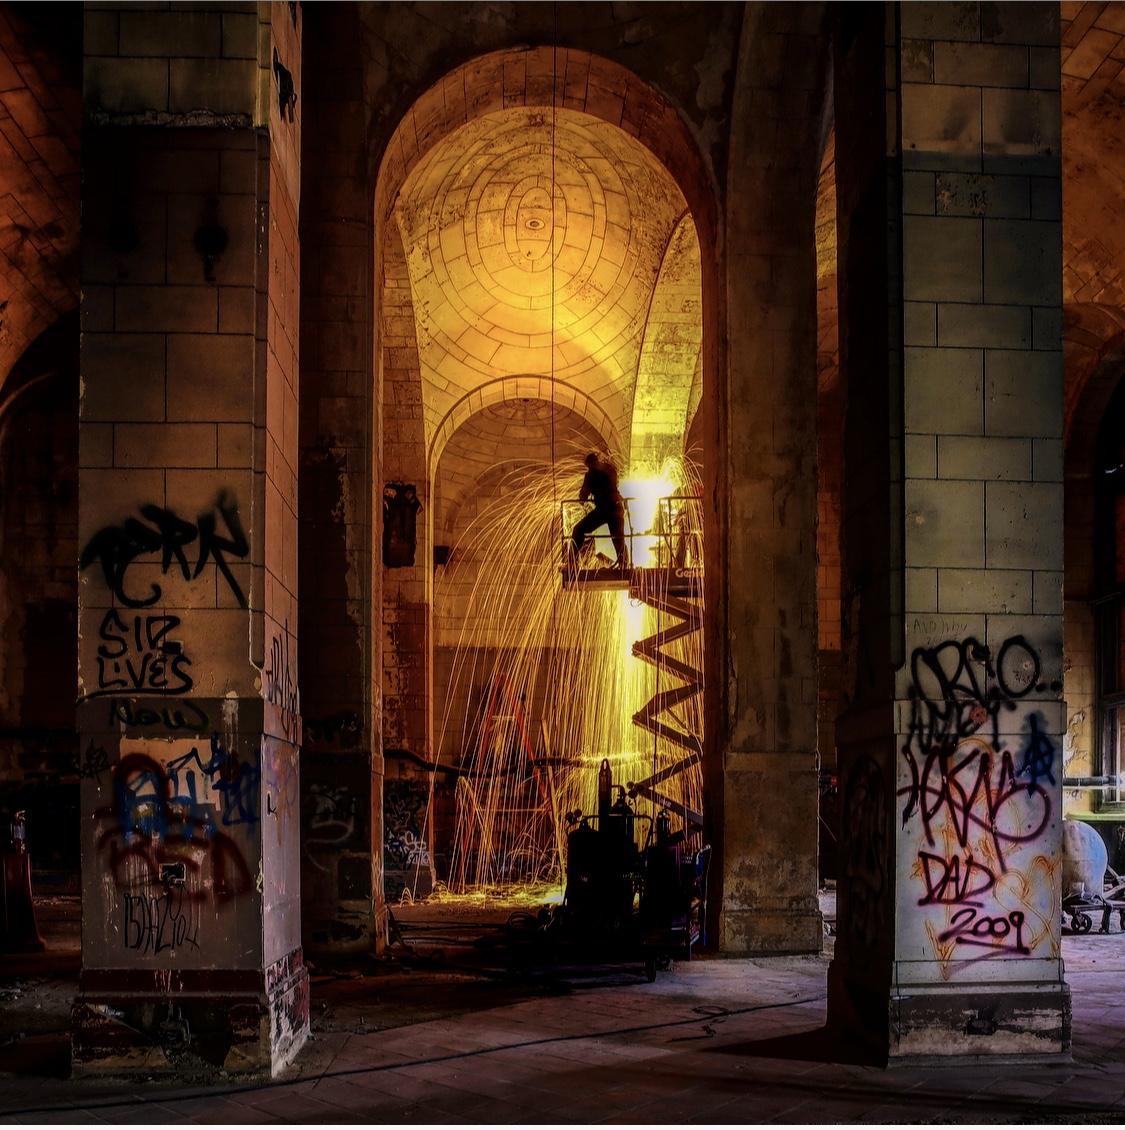 a man welds in the graffitied arches of what appears to be an old church. 